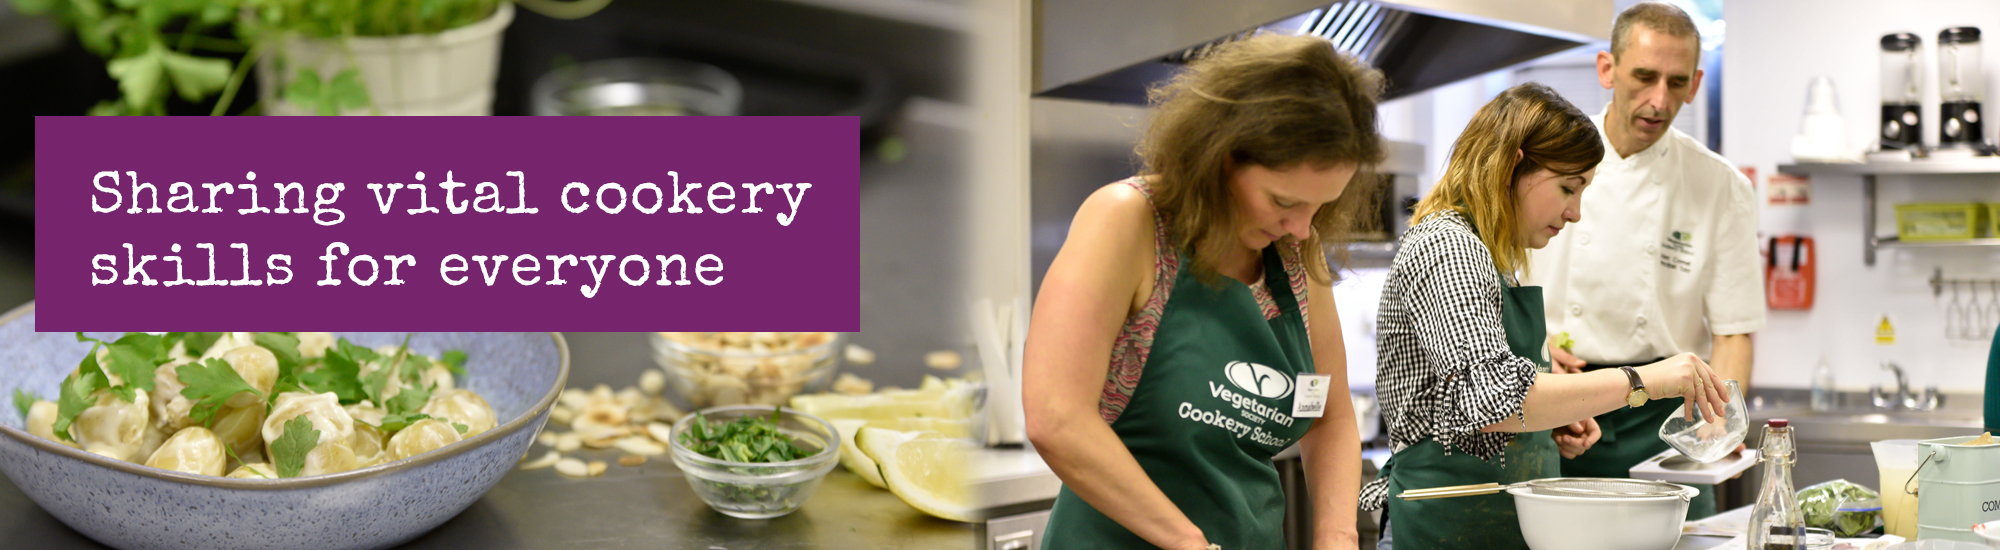 Sharing vital cookery skills for everyone